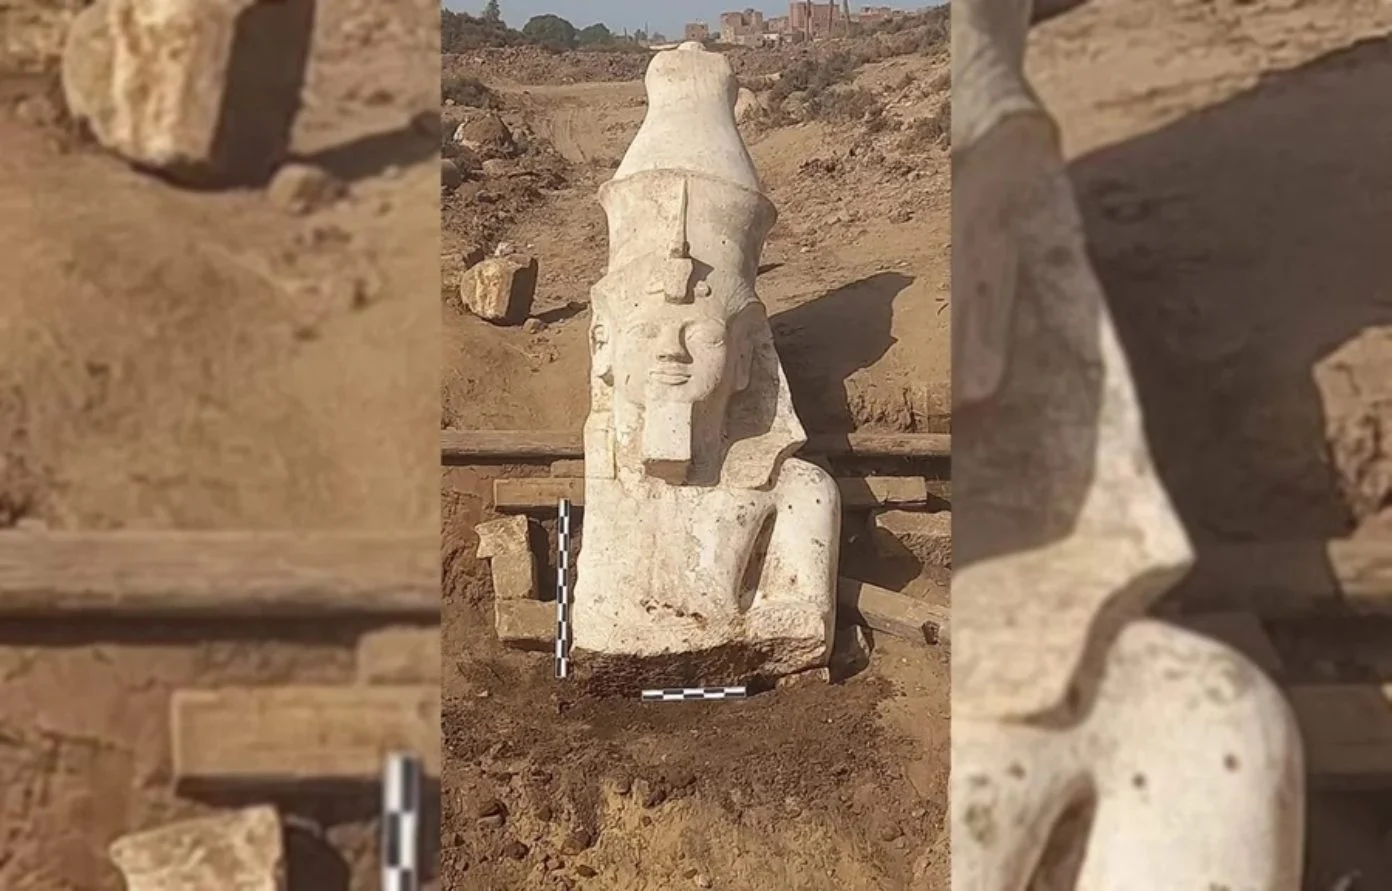 The upper part of a giant statue of Ramses II, one of the greatest pharaohs of Egypt, has been unearthed